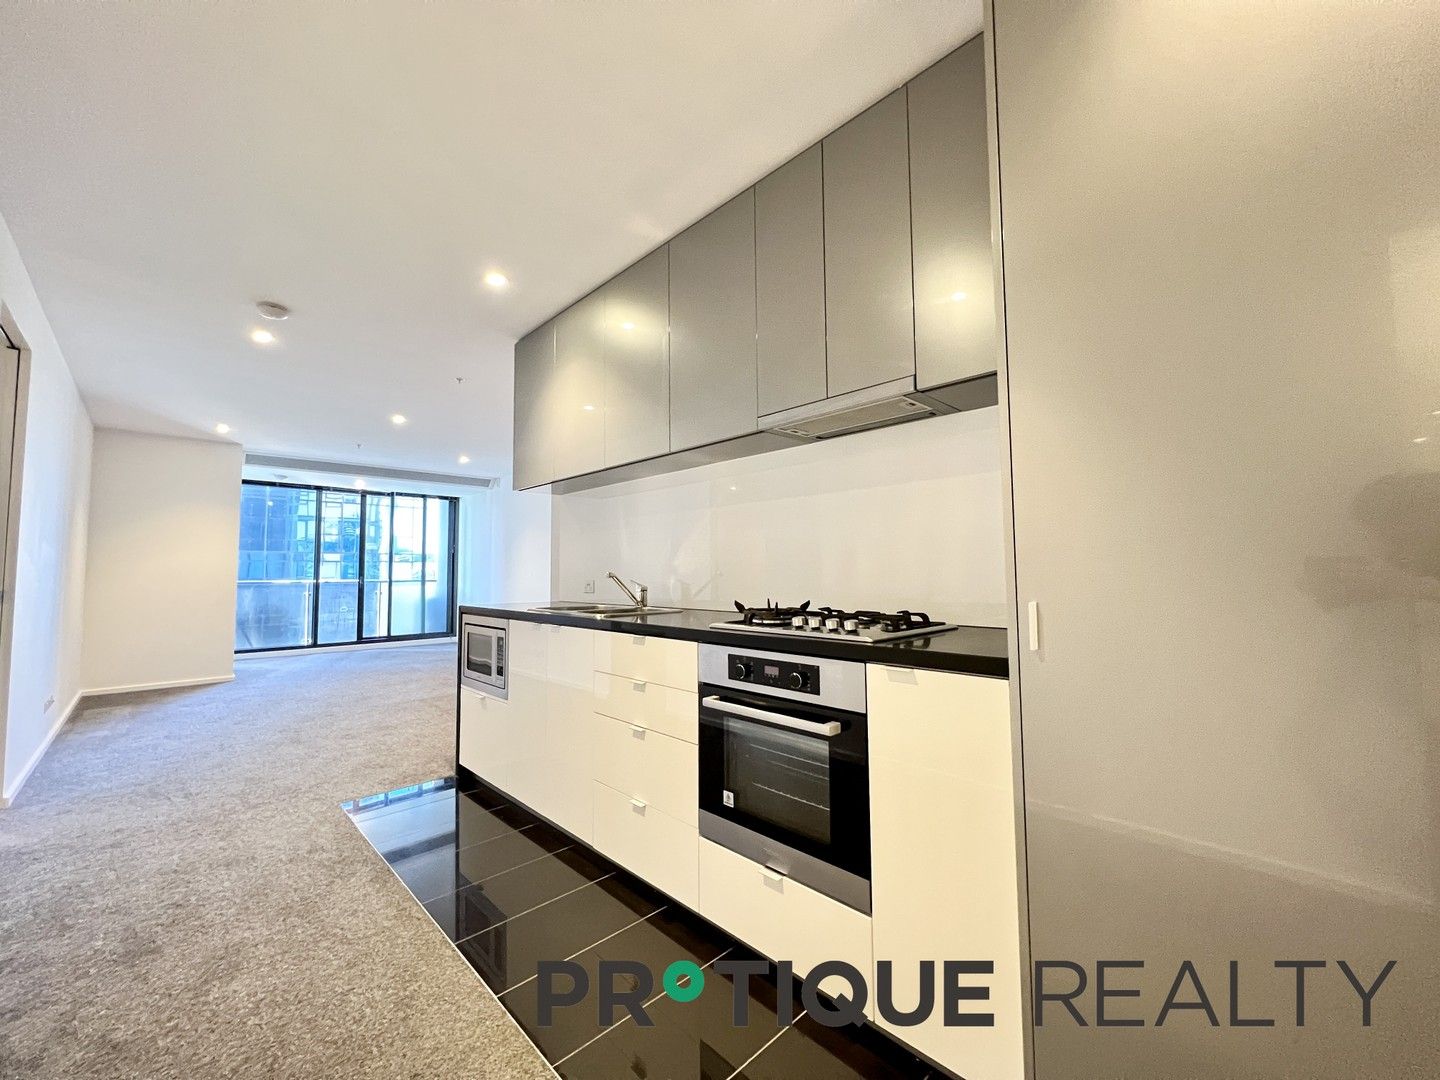 2 bedrooms Apartment / Unit / Flat in 1712/151 City Road SOUTHBANK VIC, 3006